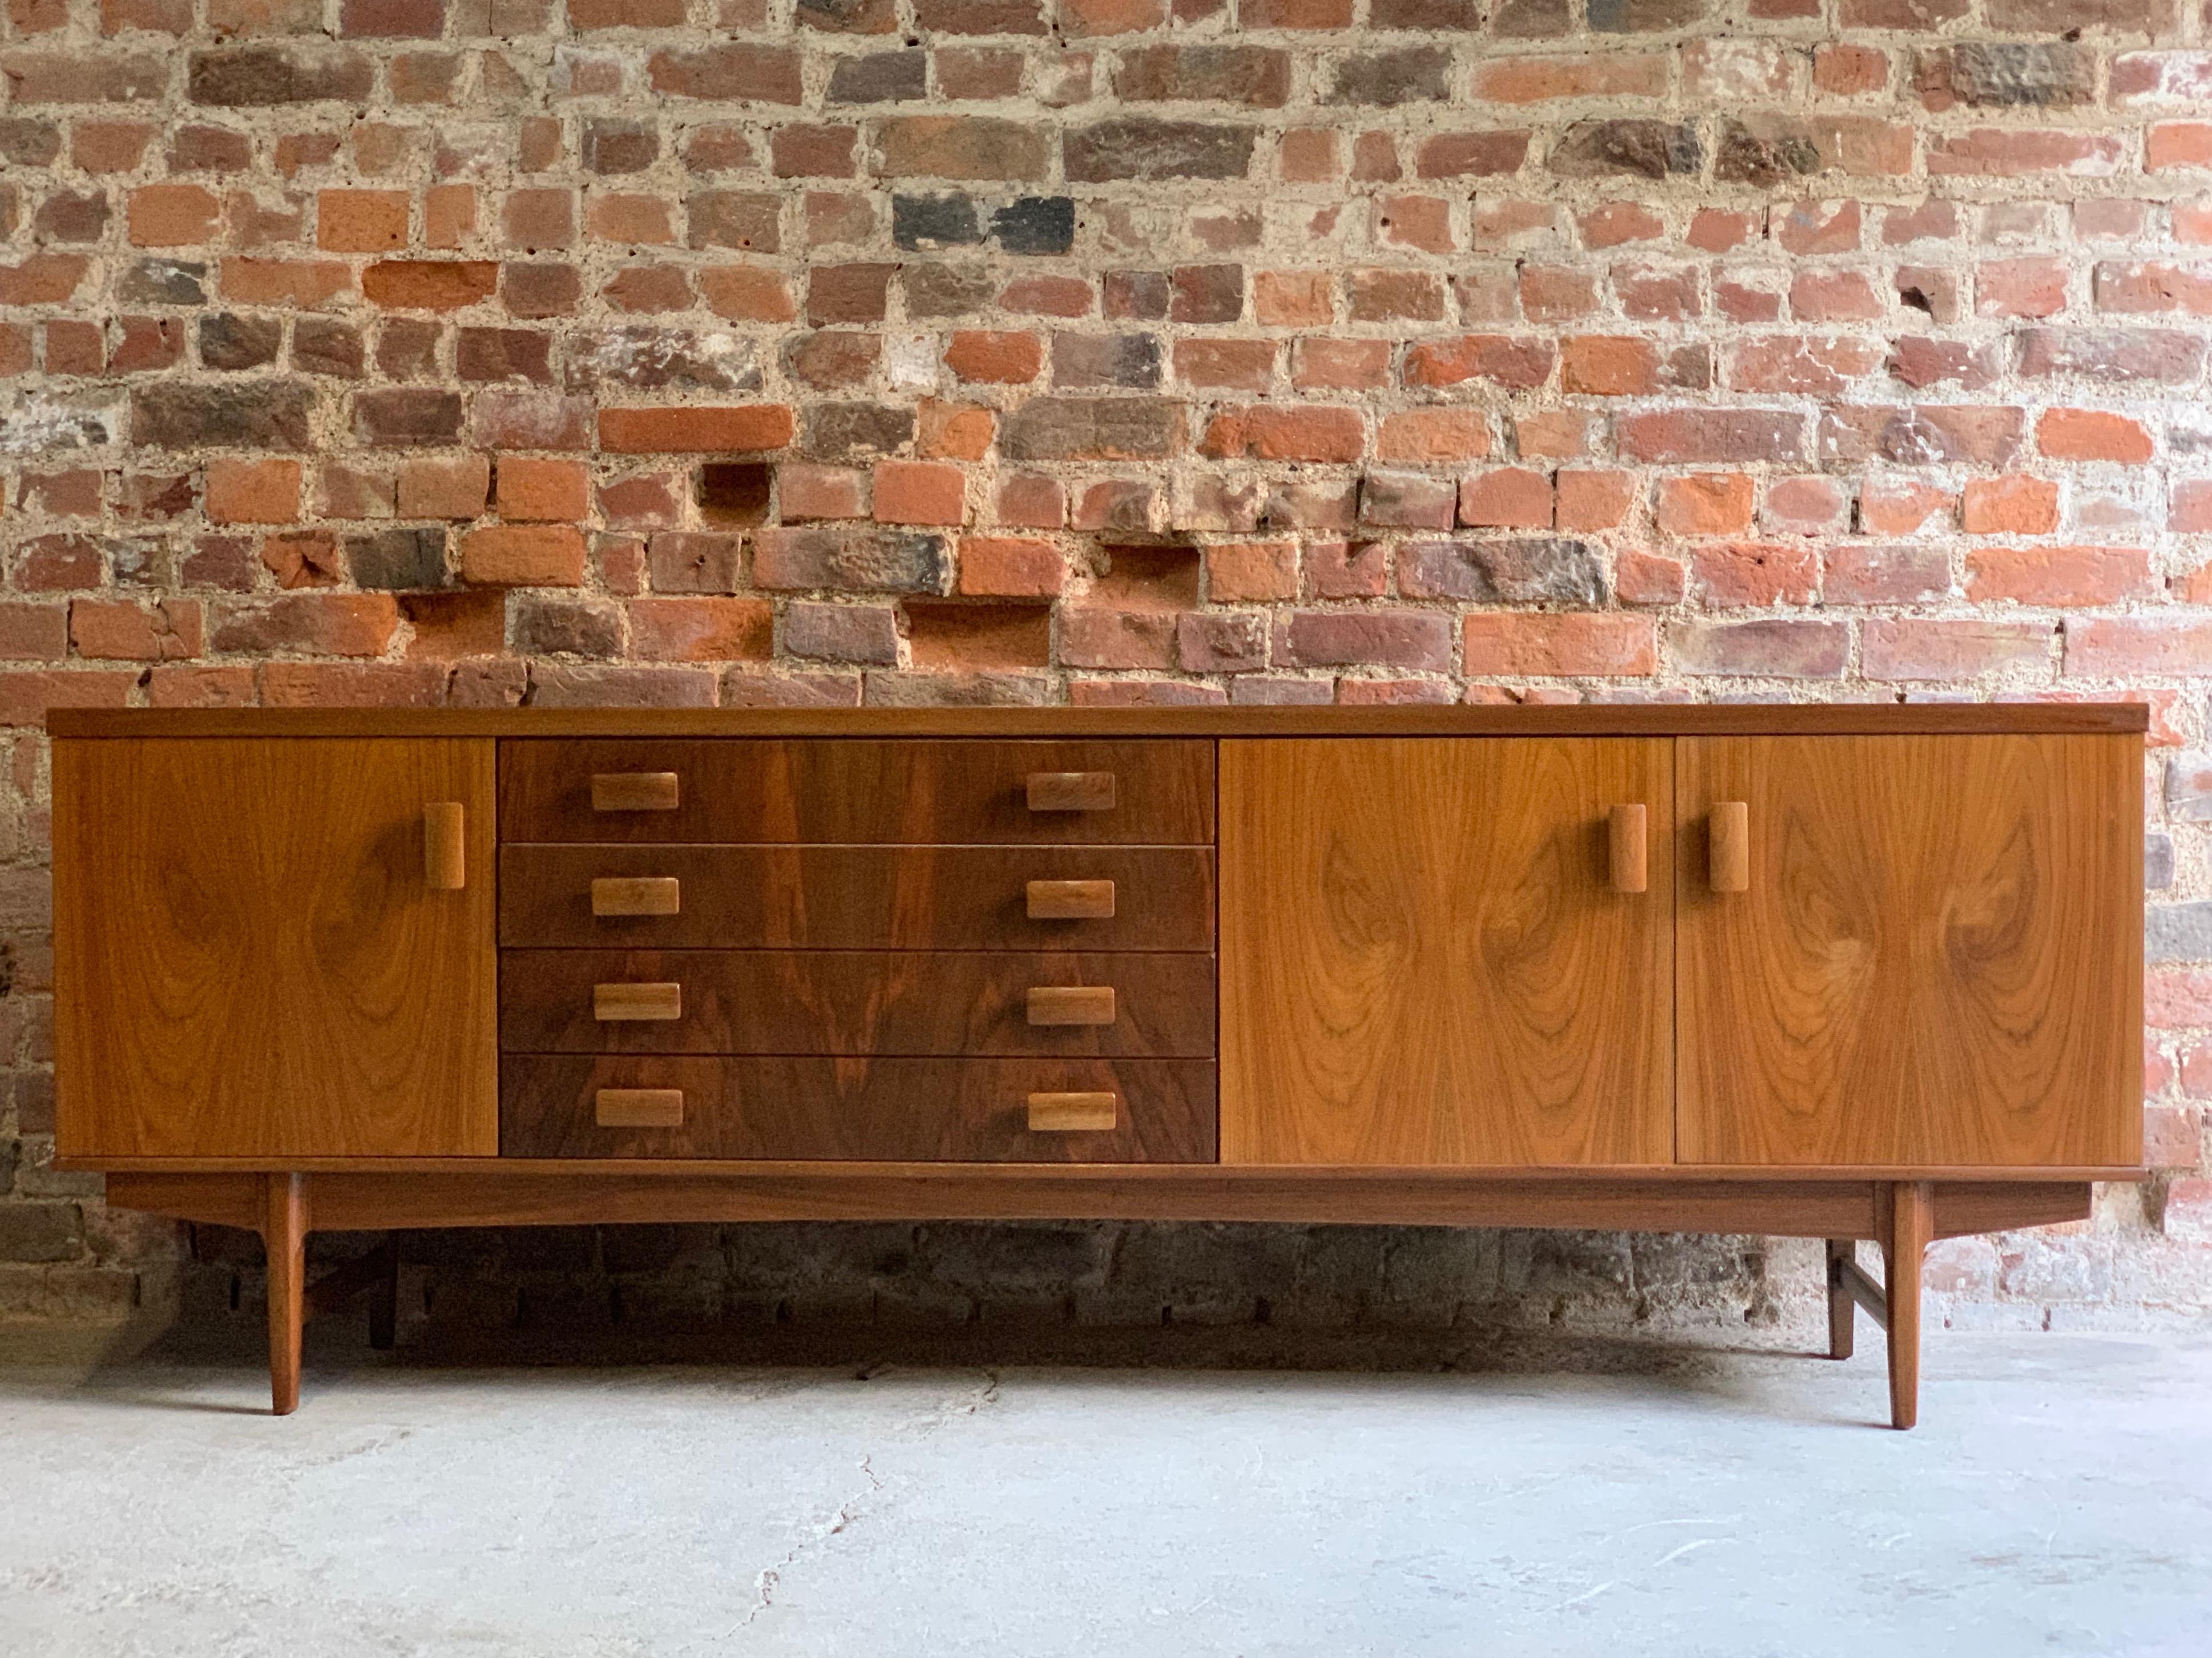 Midcentury rosewood and teak sideboard circa 1960 BCM British cabinet makers.

A truly stunning BCM (British Cabinet Makers) 7ft teak and rosewood sideboard credenza manufactured in Britain, circa 1960. The rectangular teak top with rosewood sides